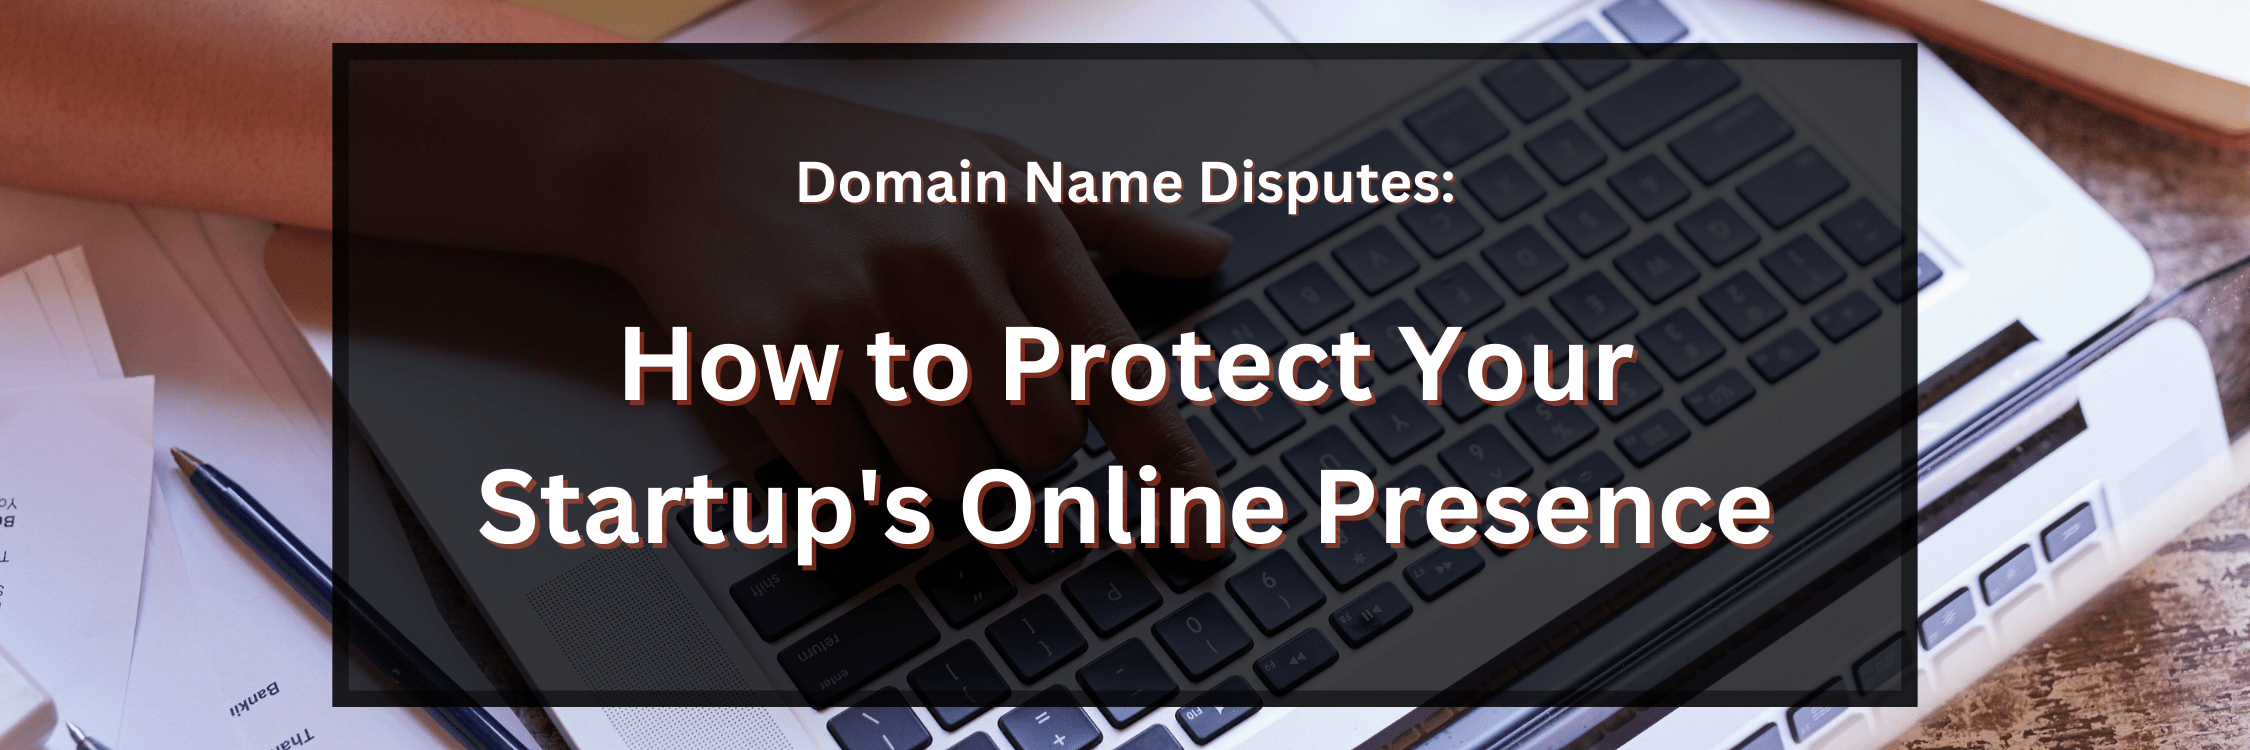 Domain Name Disputes How To Protect Your Startups Online Presence